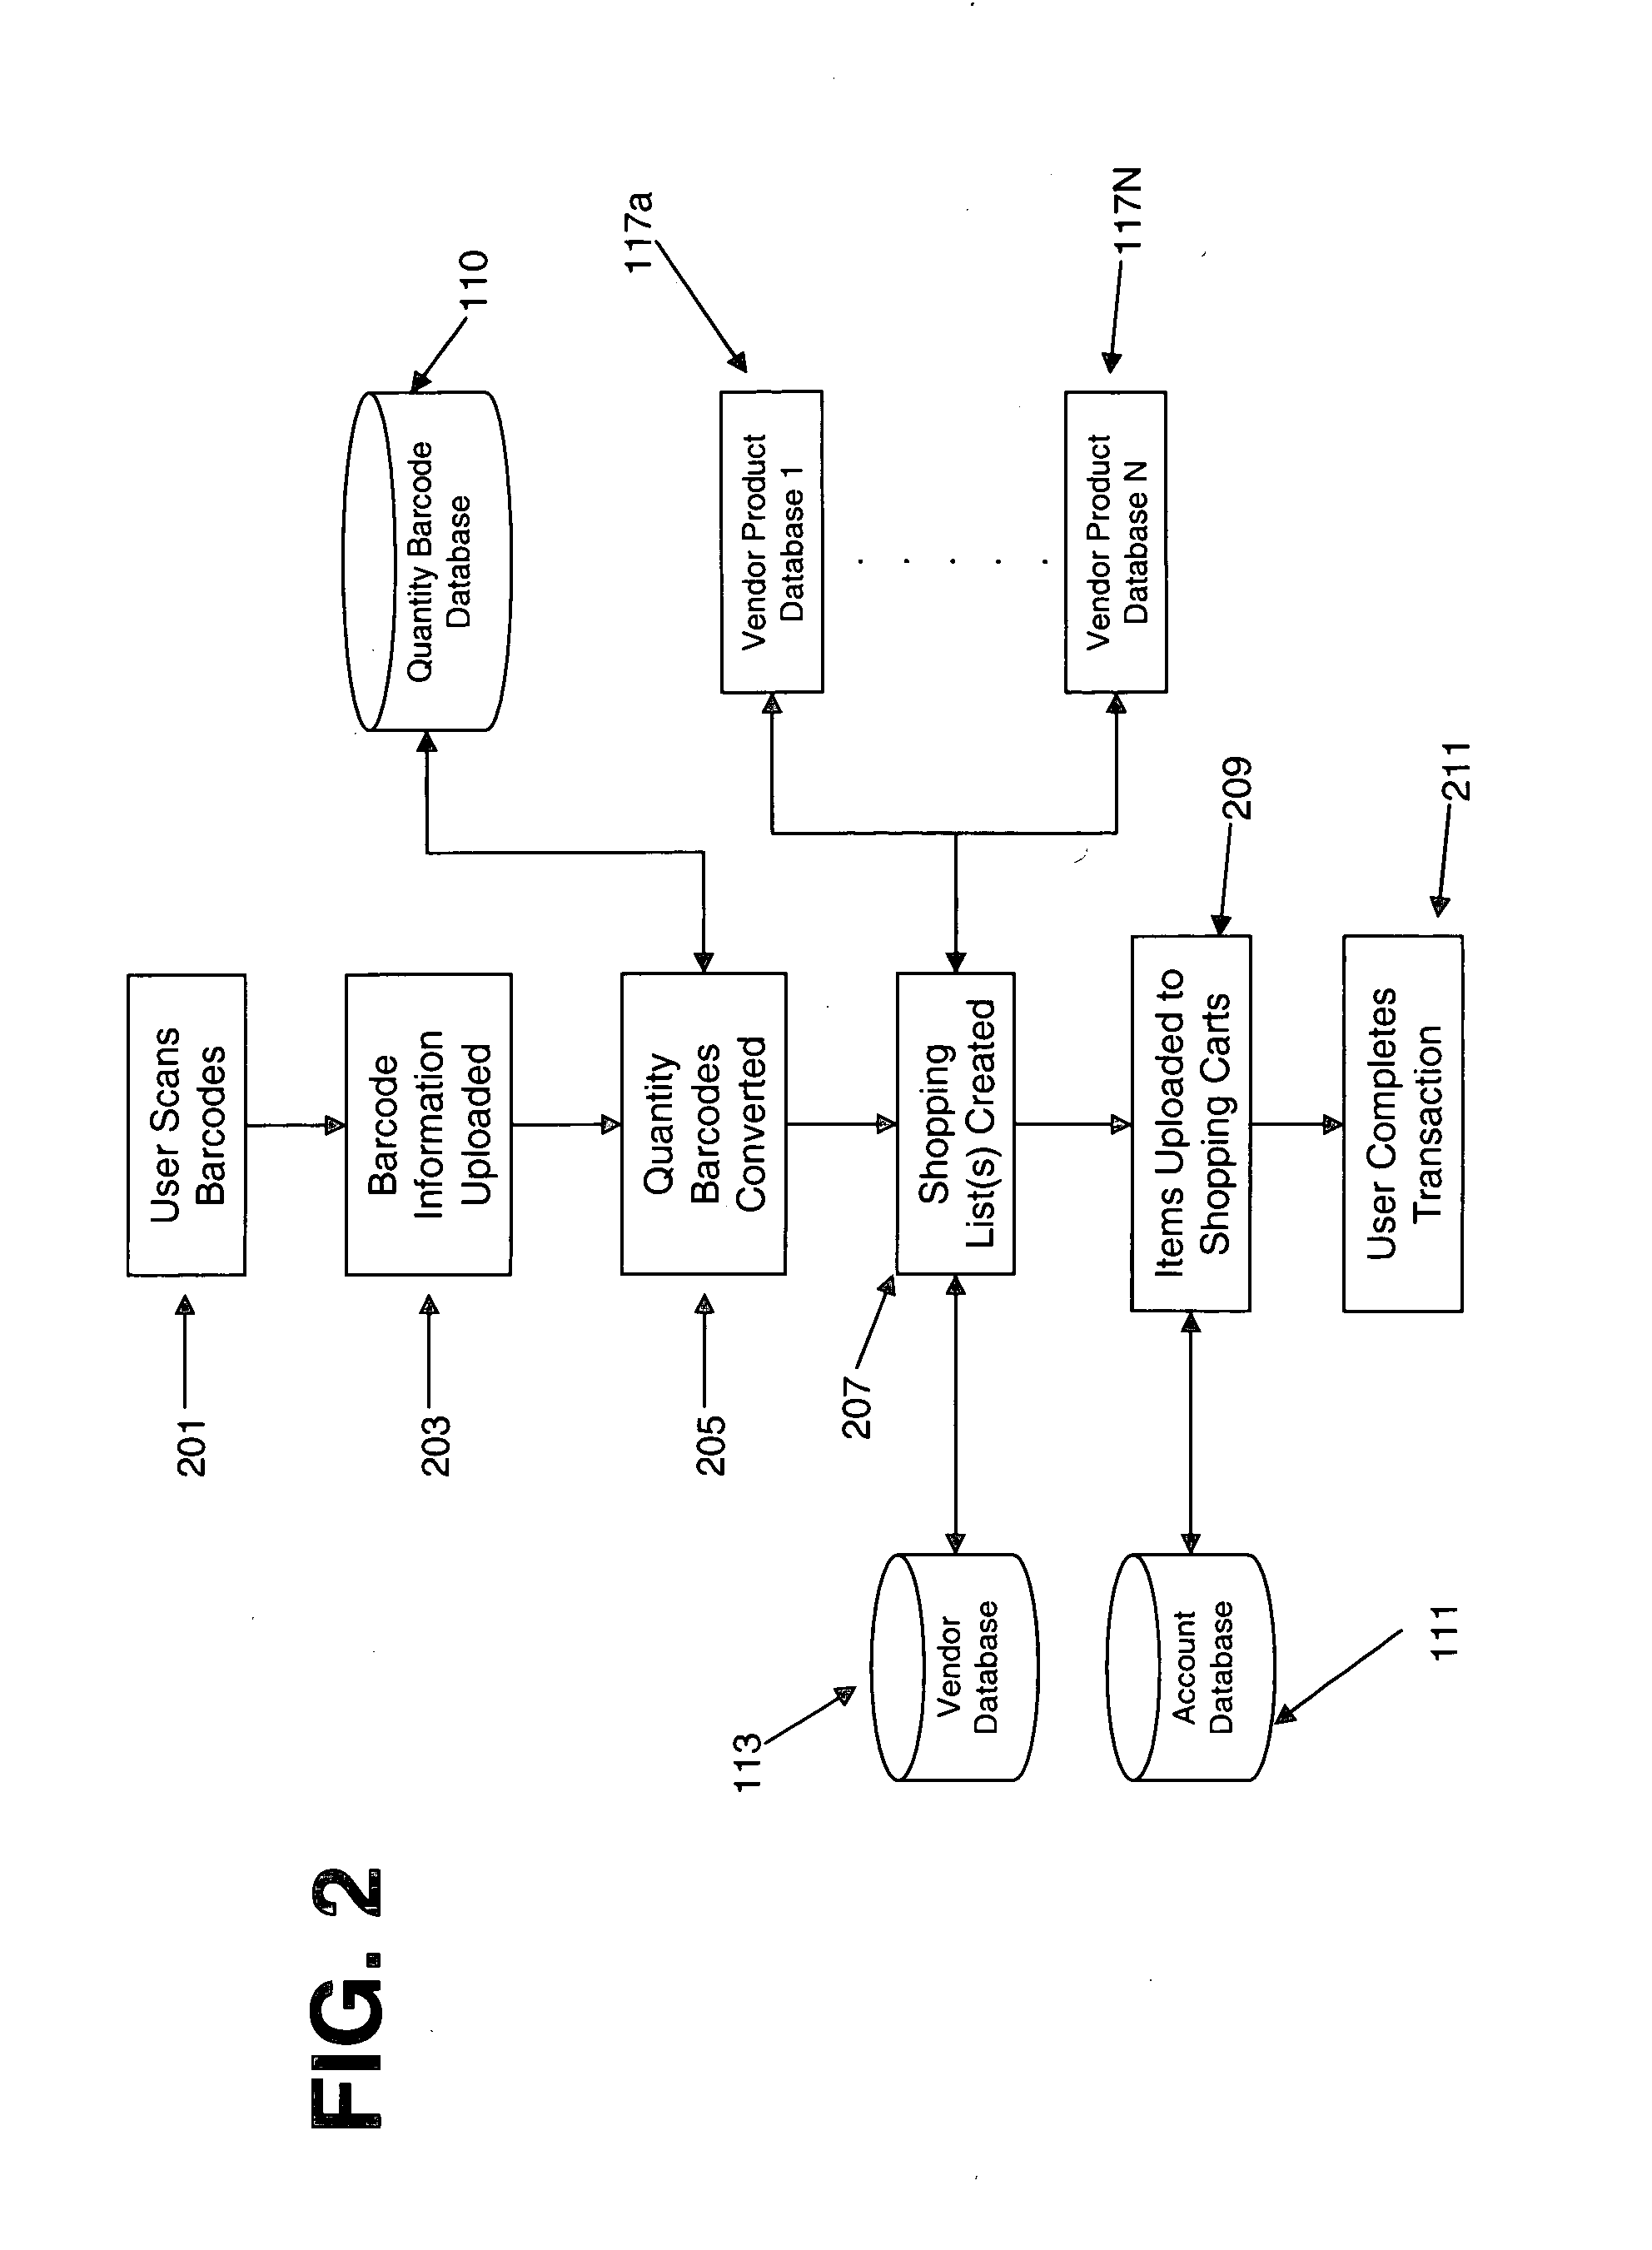 System and method for aggregate online ordering using barcode scanners